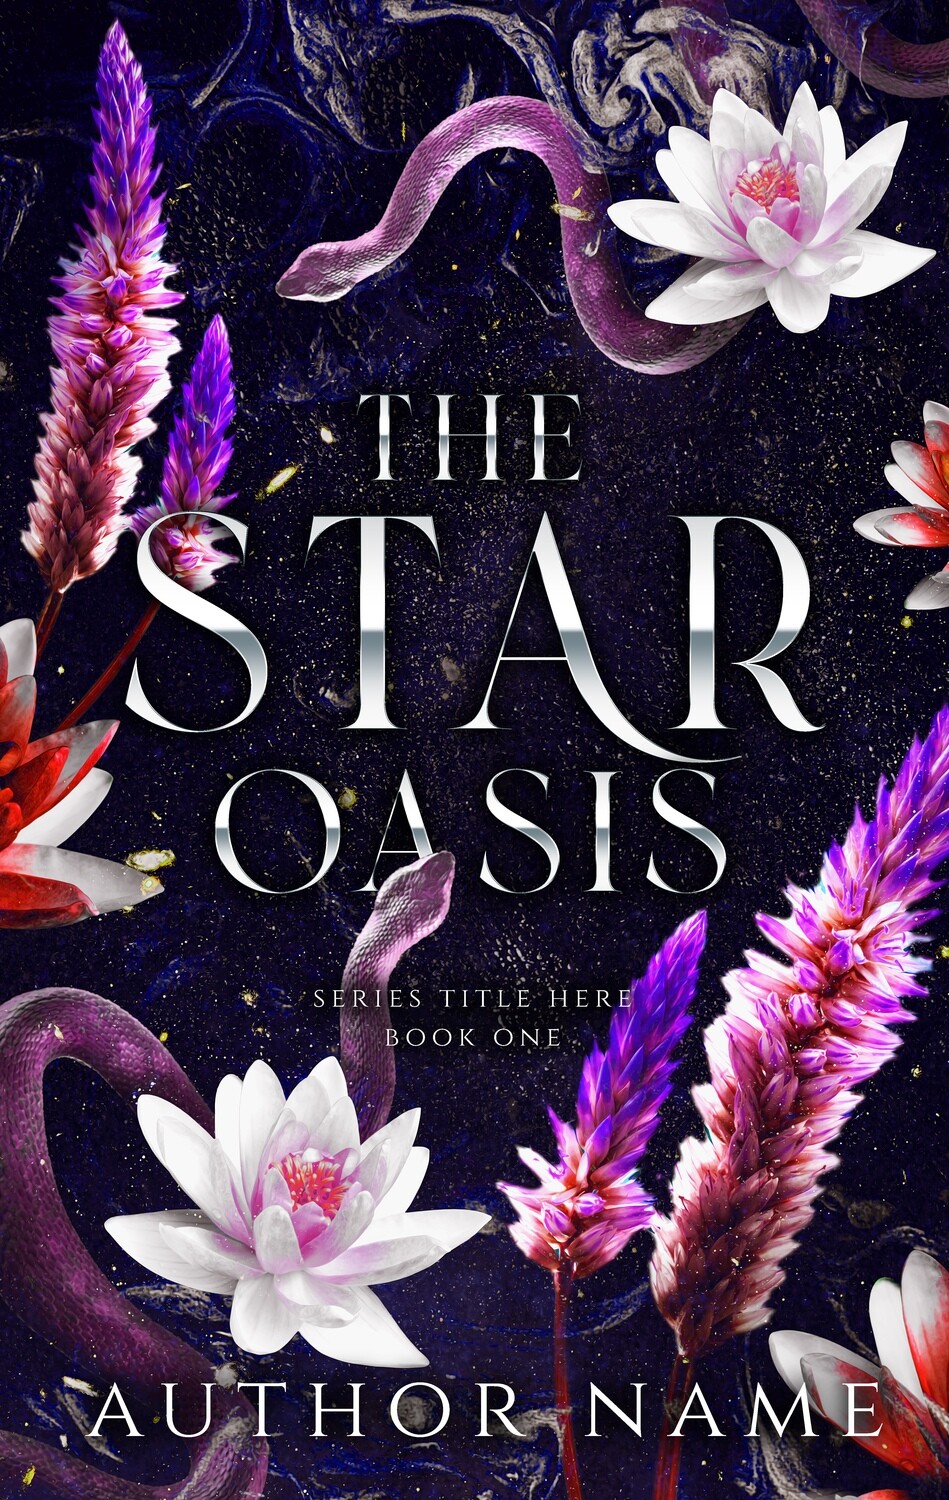 THE STAR OASIS